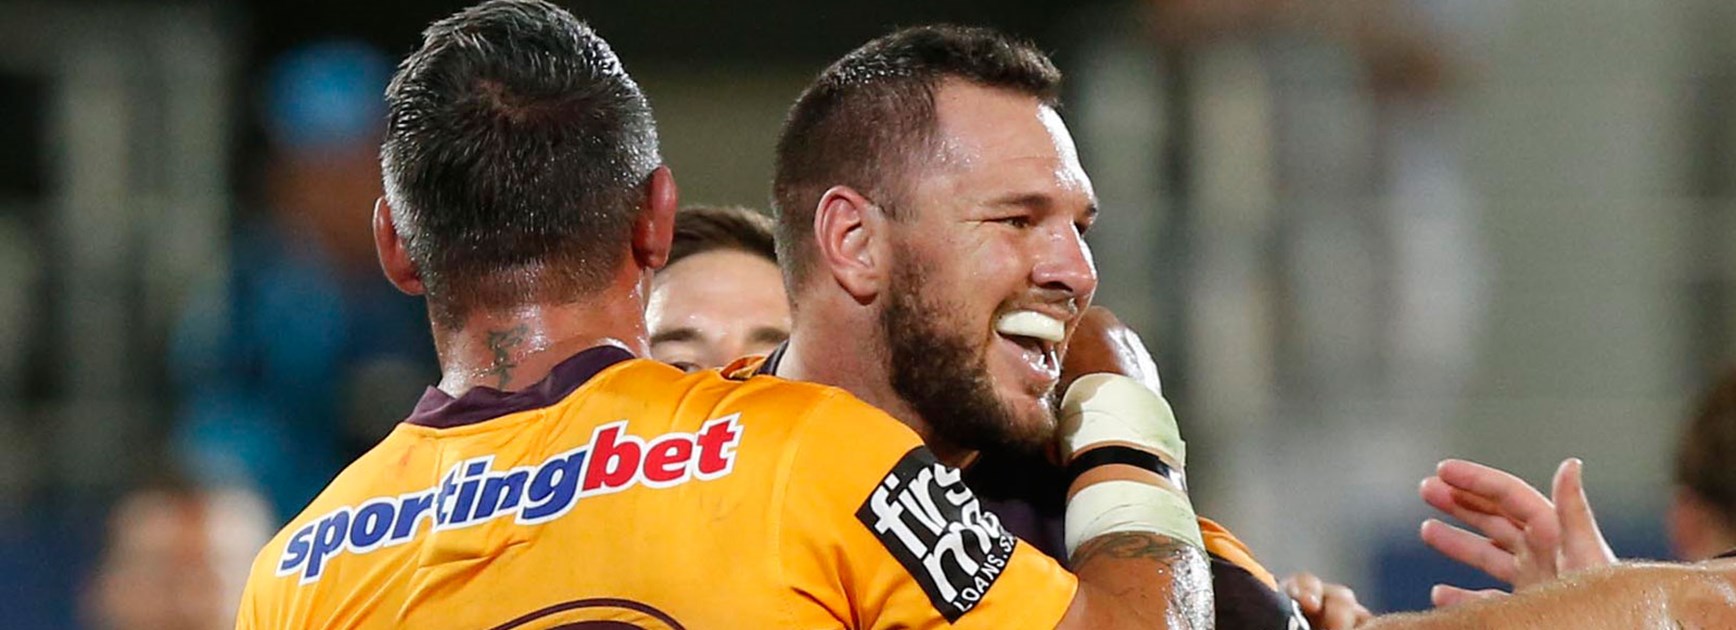 Mitchell Dodds is hoping to use his return to the NRL to earn a new contract with the Broncos.